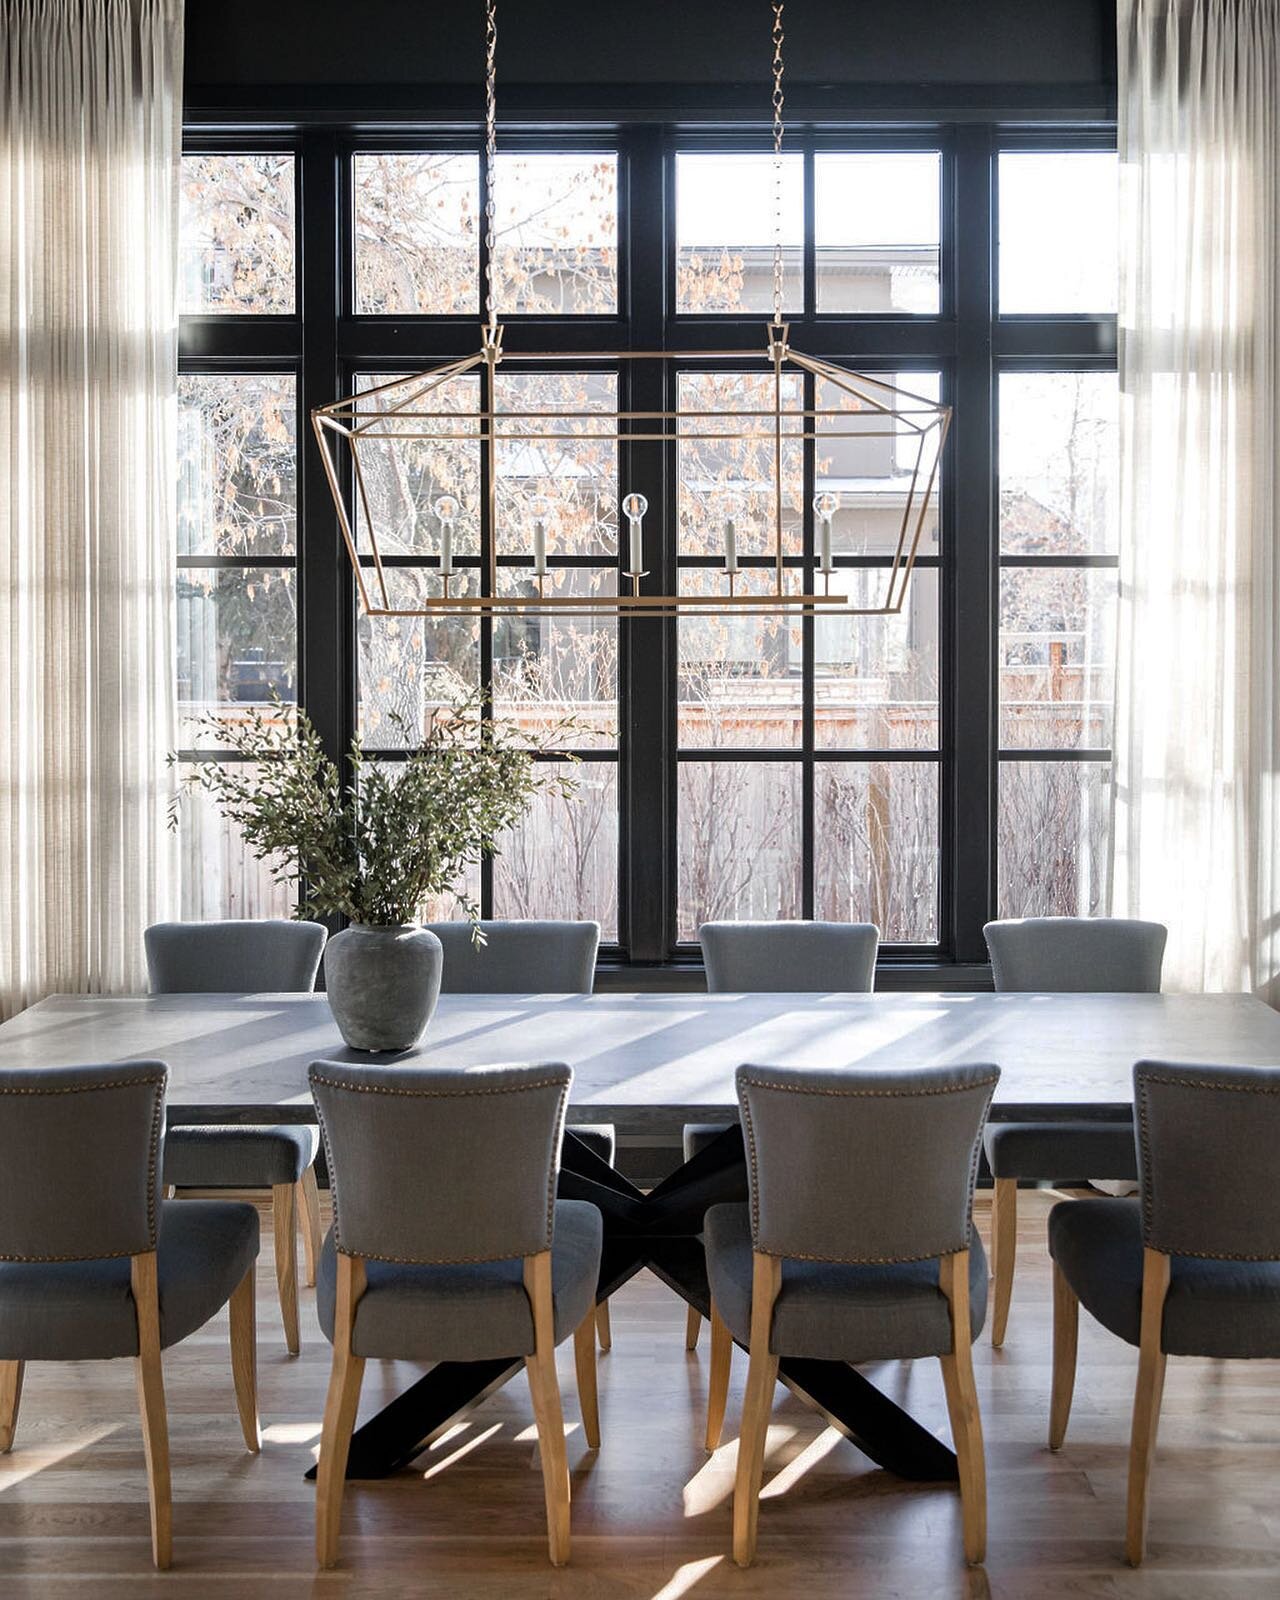 A straight-on shot of this dining space that has the most beautiful light coming through those glorious black stained windows. 
.
.
.
.
.
.
#diningroom #diningroomdecor #blackwindows #interiordesign #homeinterior #dreamhome #hillhurstcustom3